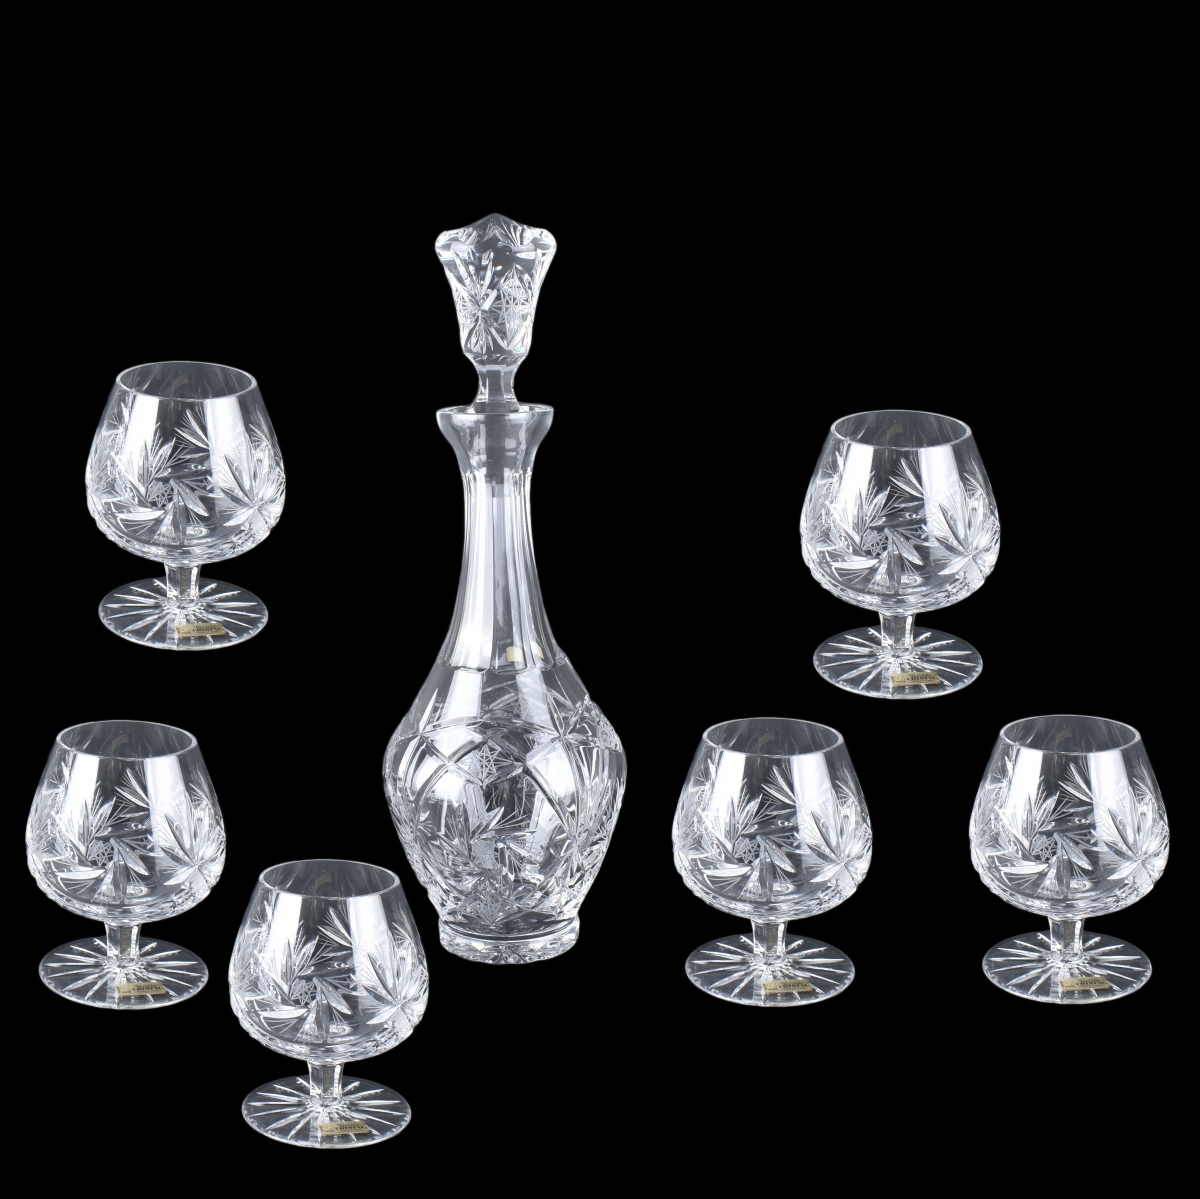 Hungarian Decanter and Brandy Snifters